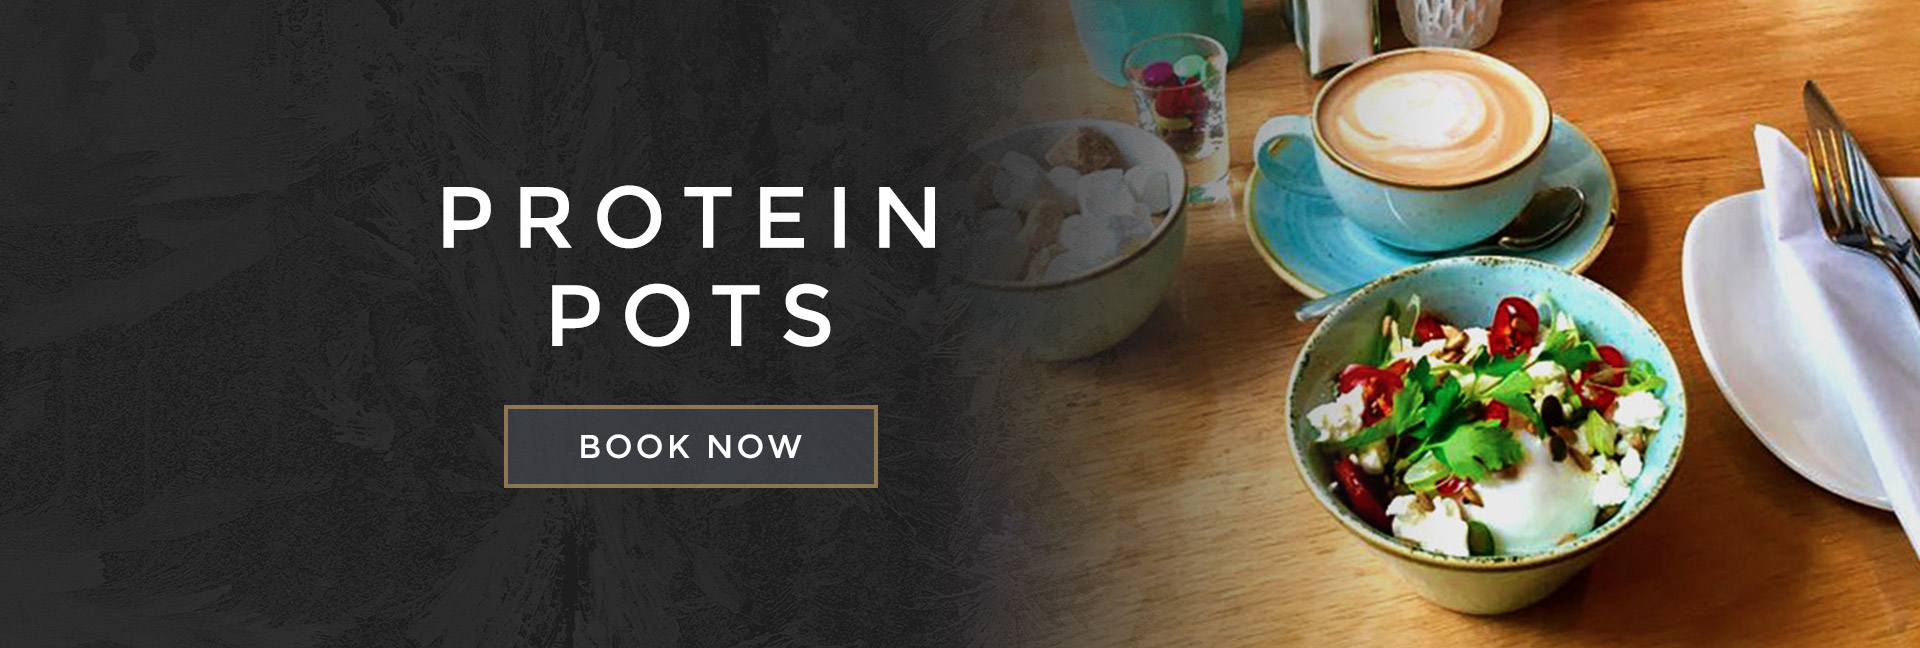 Protein pots at All Bar One Tower of London - Book your table